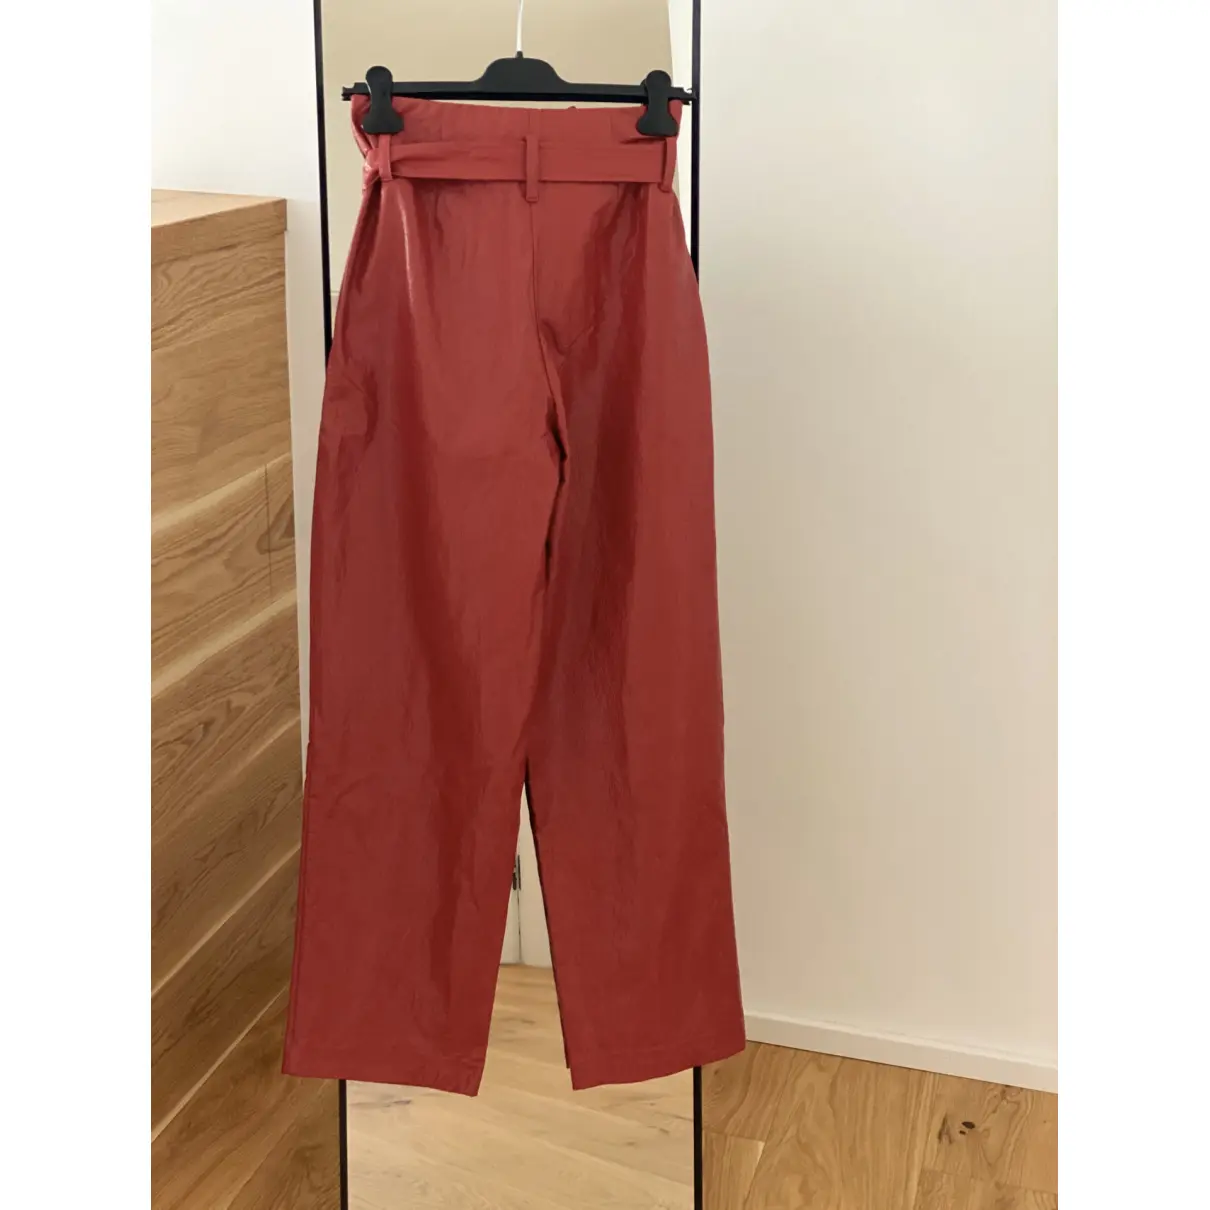 Buy 8PM Vegan leather trousers online